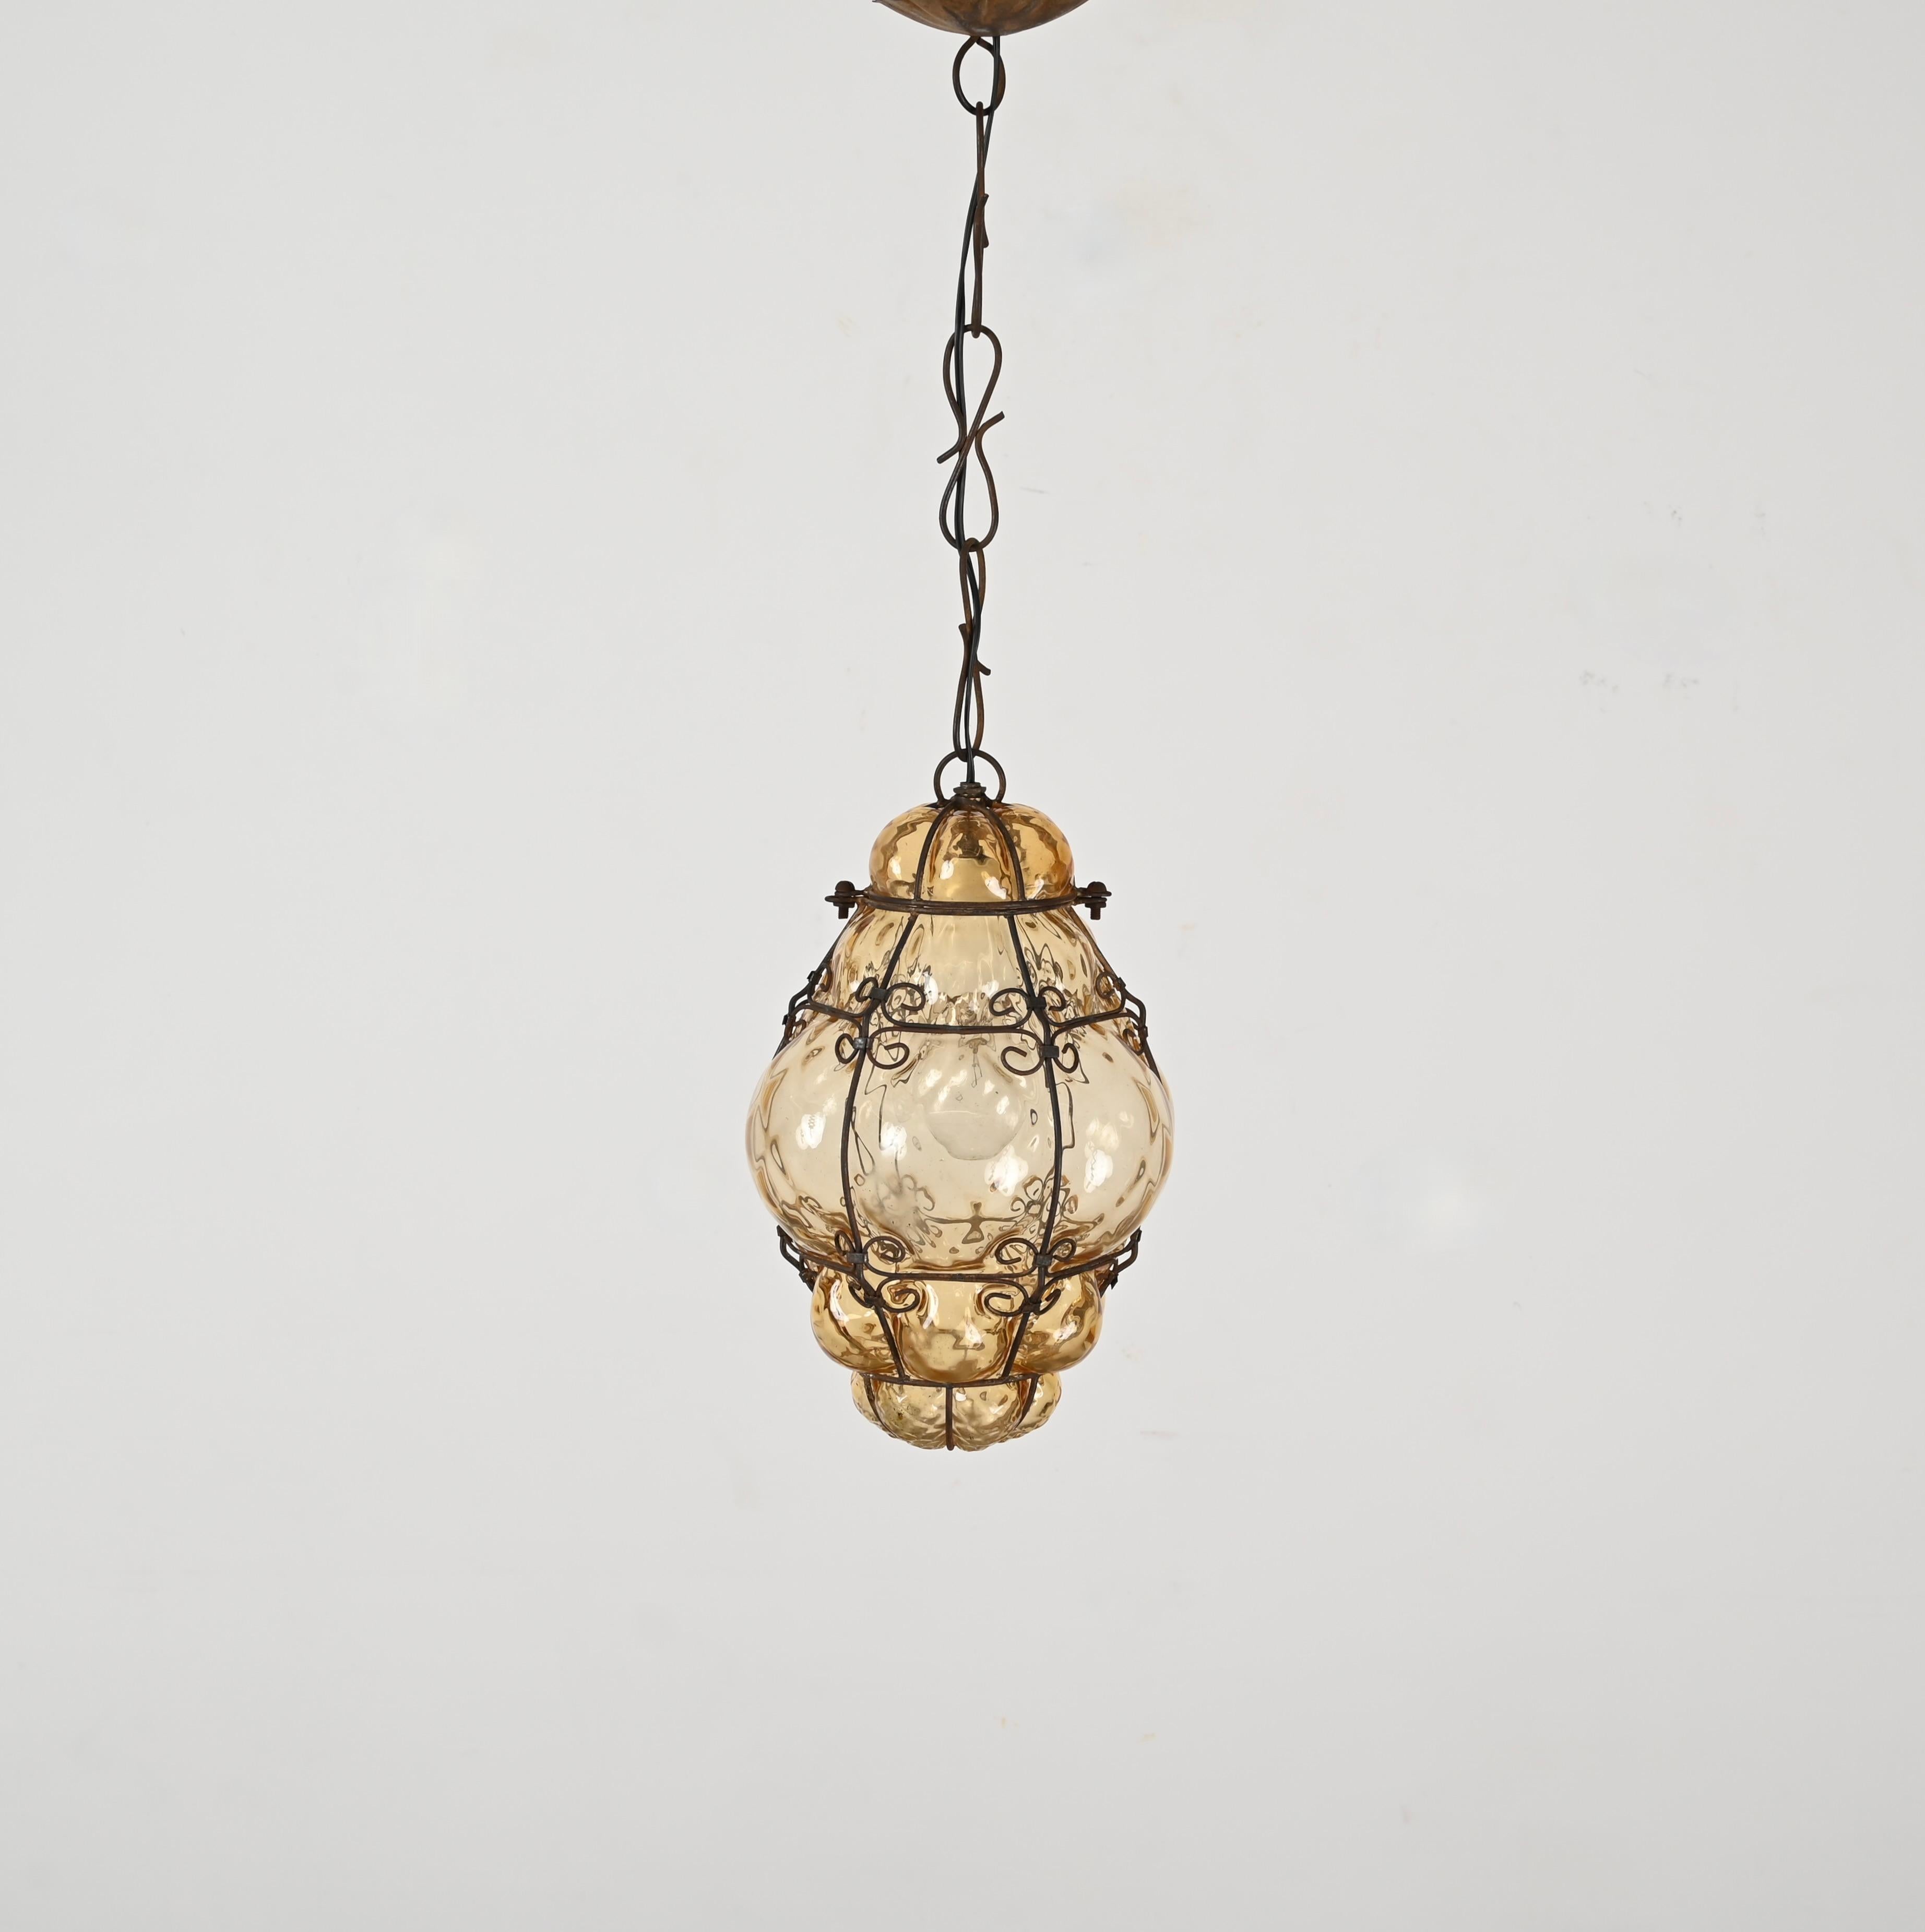 Hand-Crafted Venetian Murano Mouthblown Amber Glass Chandelier with Iron Frame, Italy 1940s